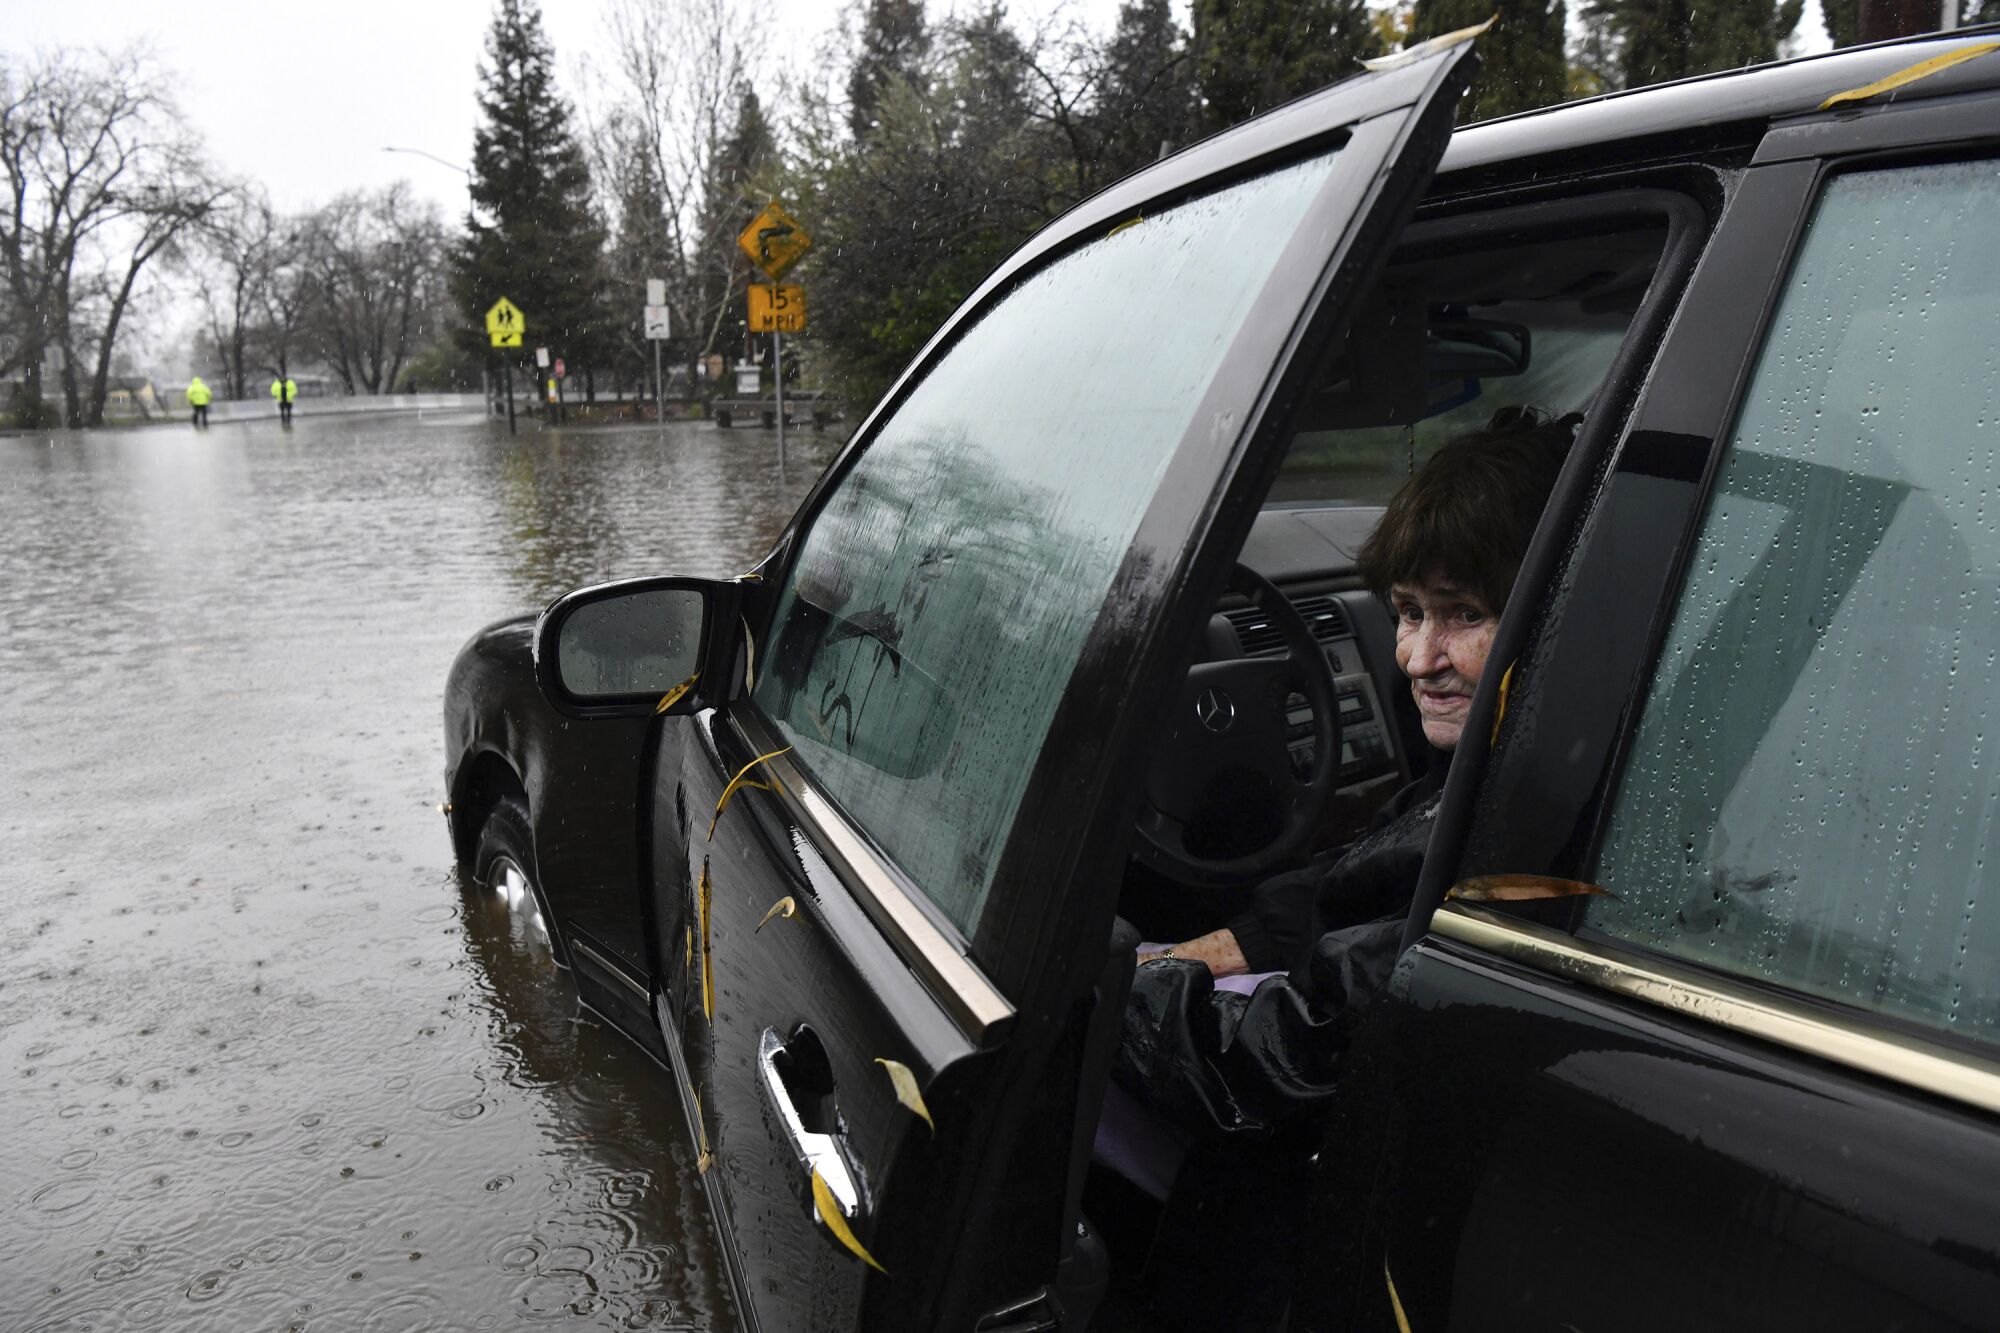 A woman peeks from an open door of her car, which is sitting in a flooded area.